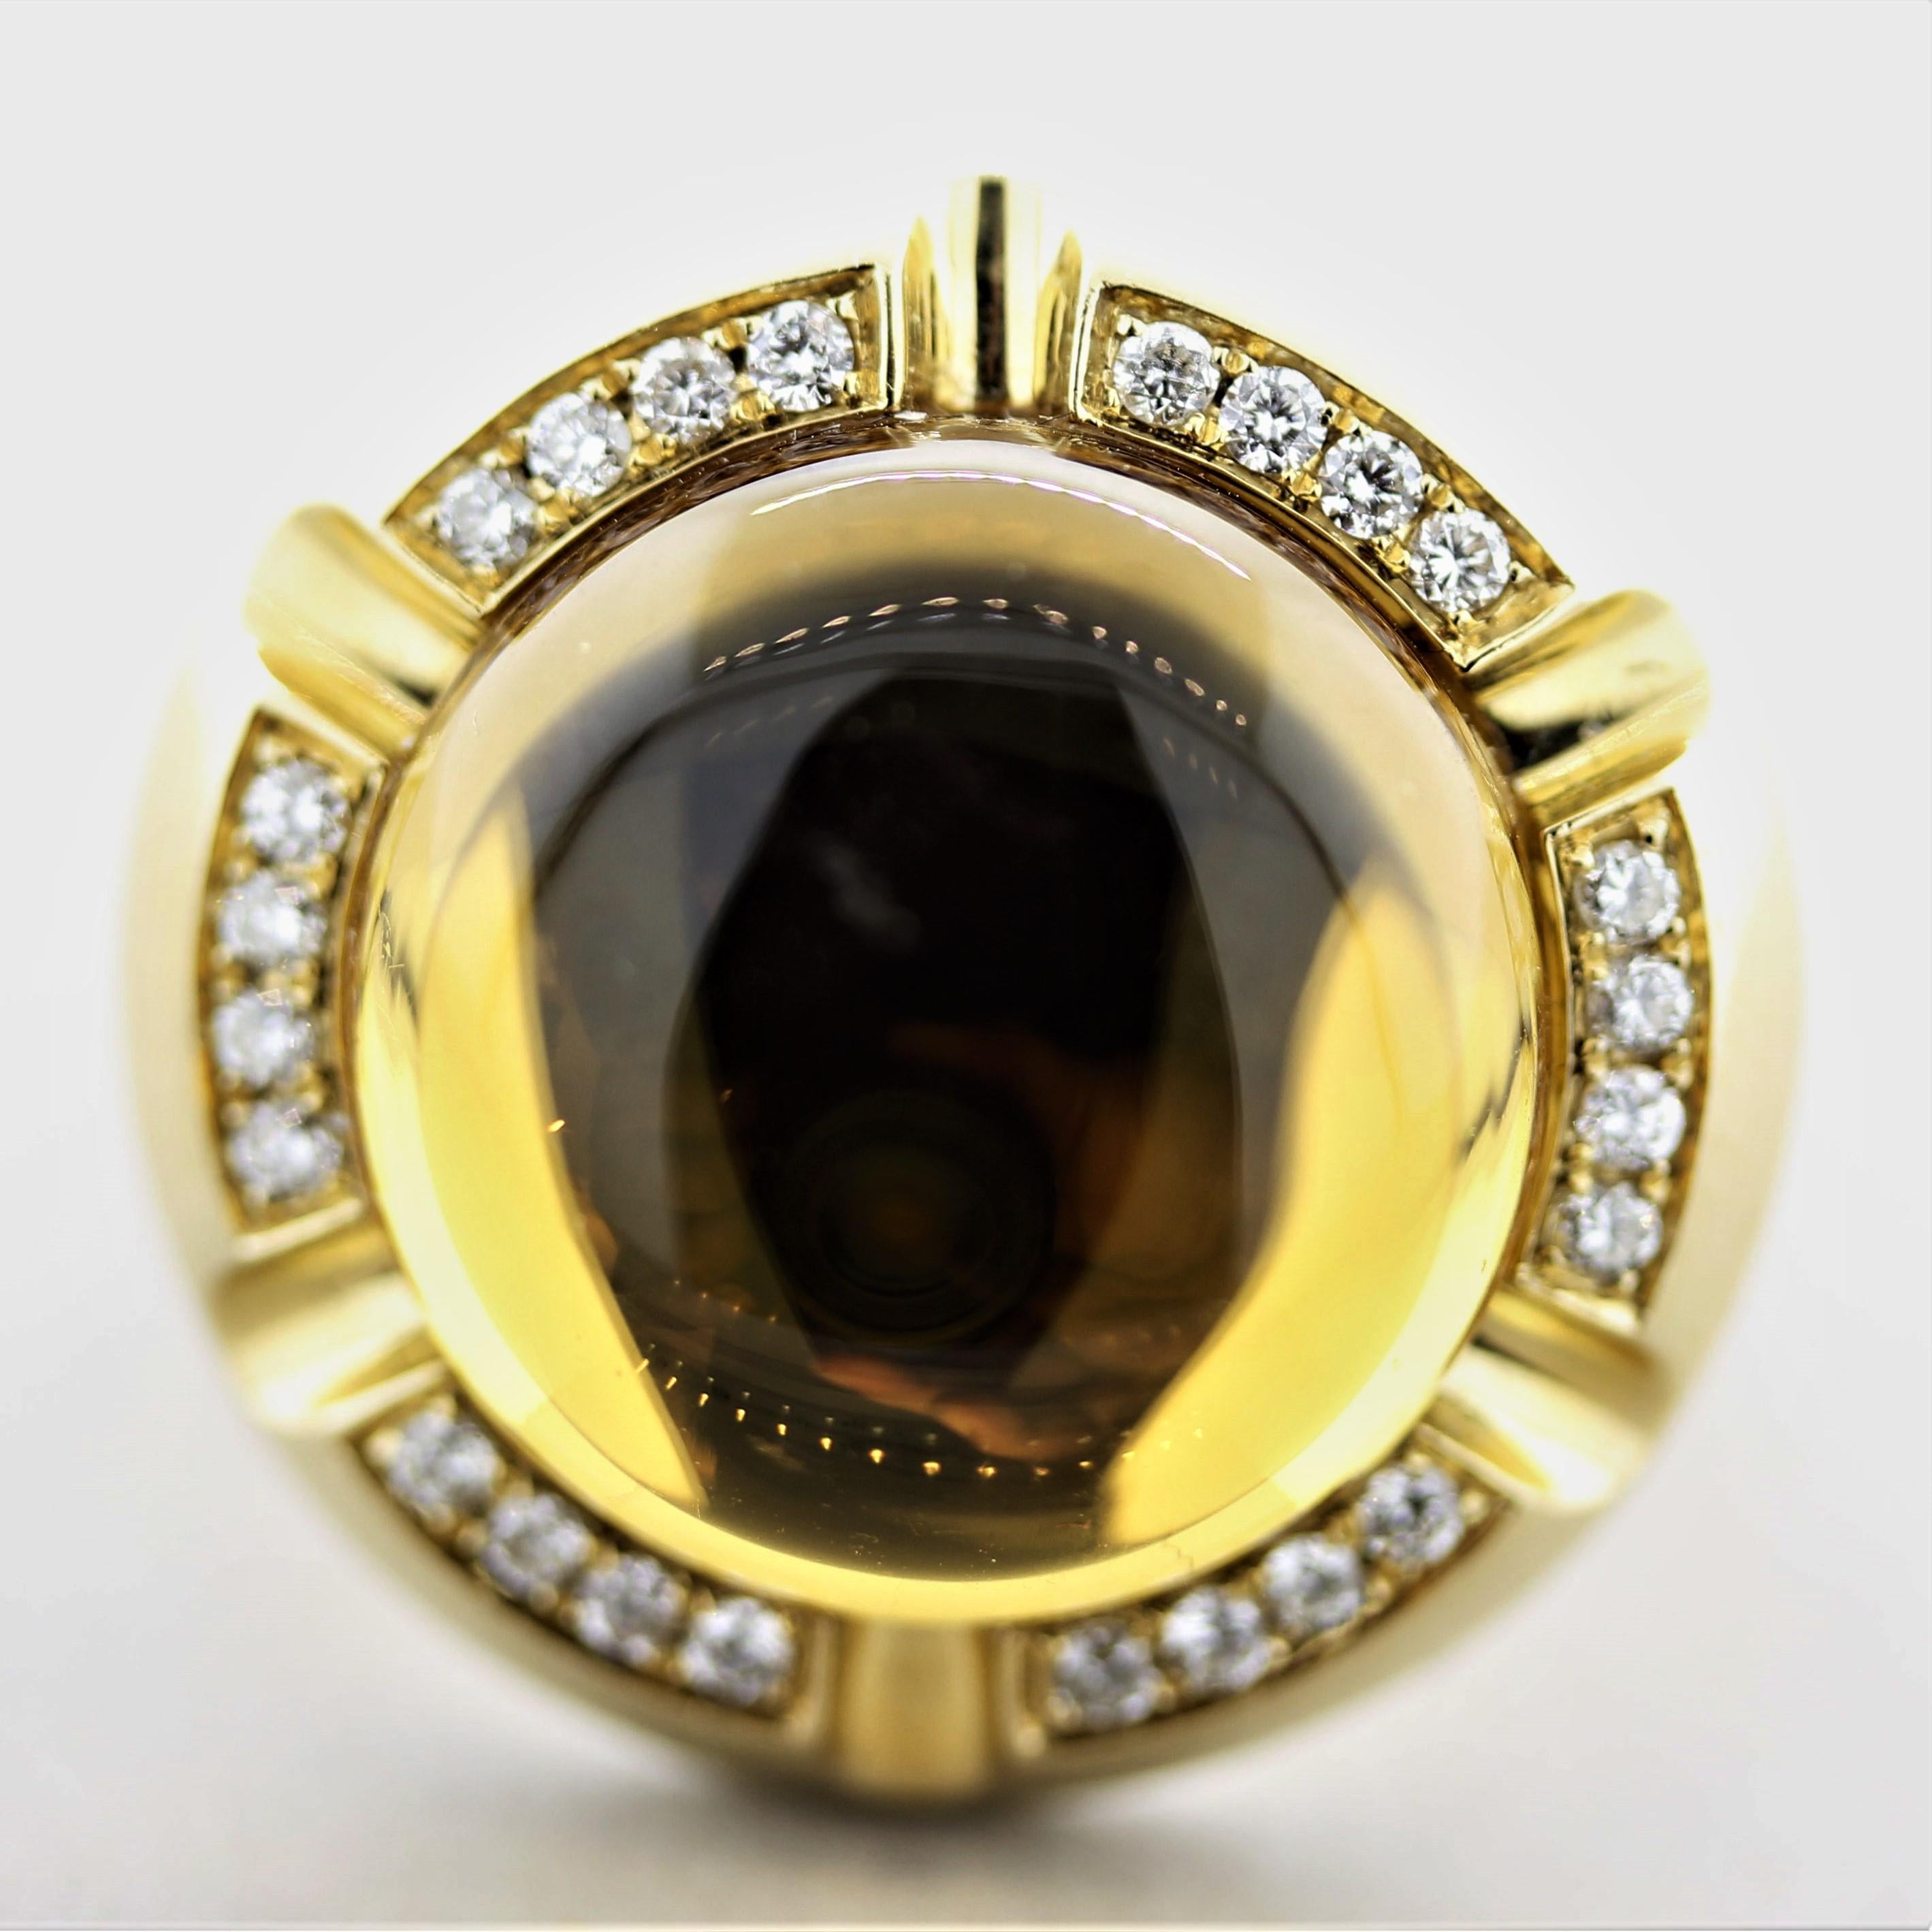 A fin and stylish gold ring featuring a domed cabochon citrine and bright white diamonds! The citrine weighs 16.67 carats and is free from any visible inclusions making the stone appear to be a glowing crystal ball! It is accented by 0.30 carats of